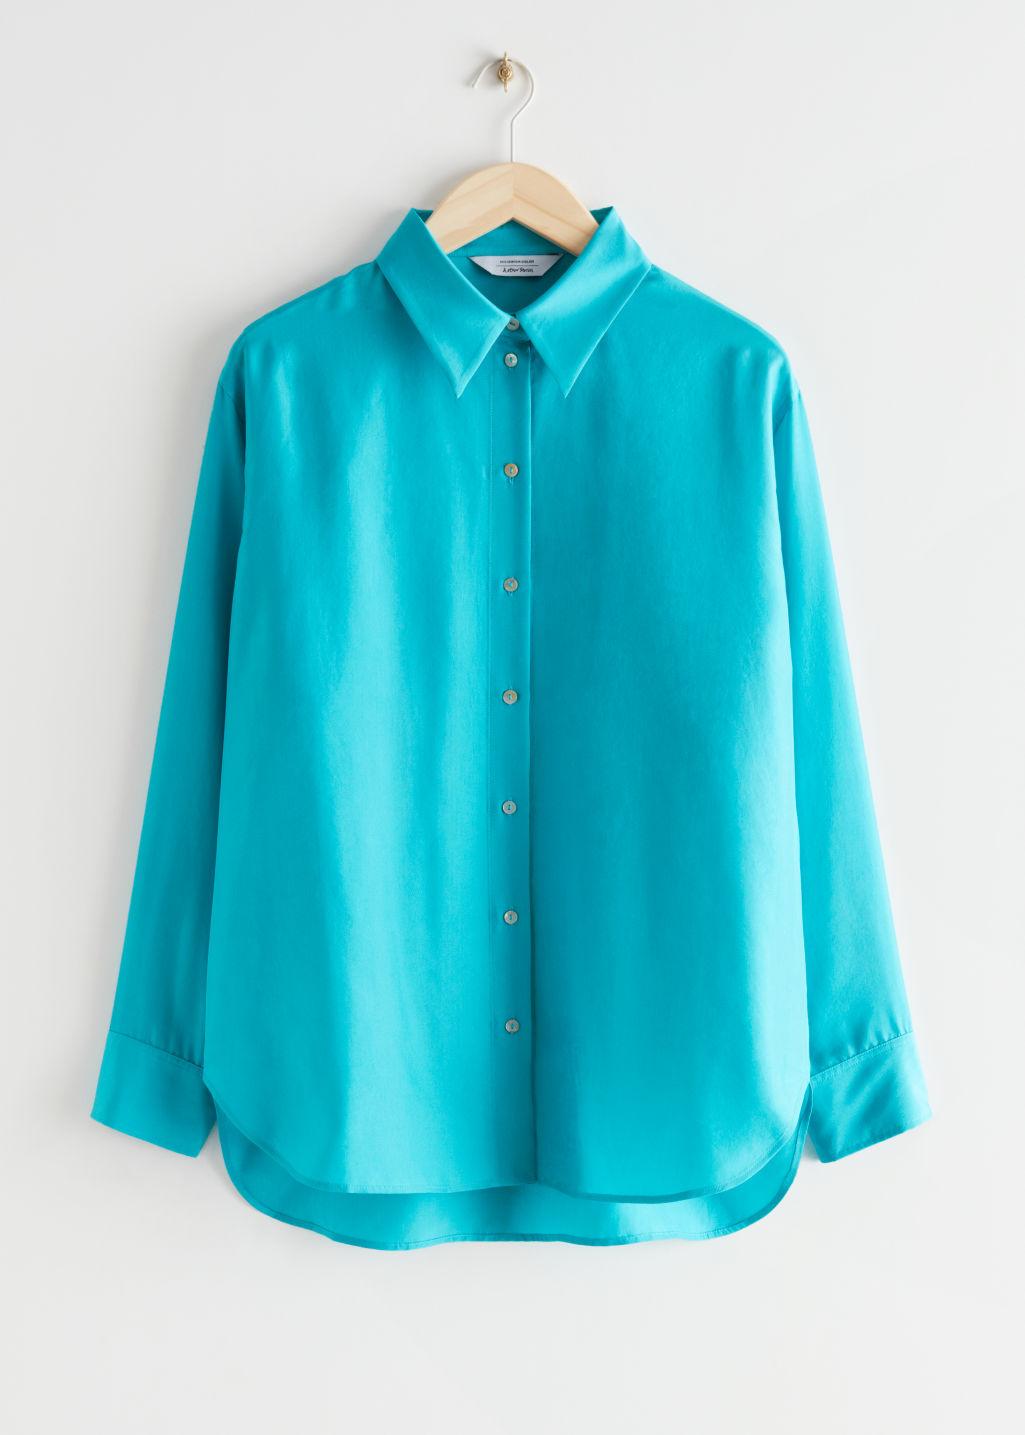 & Other Stories Shell Button Silk Shirt in Blue | Lyst